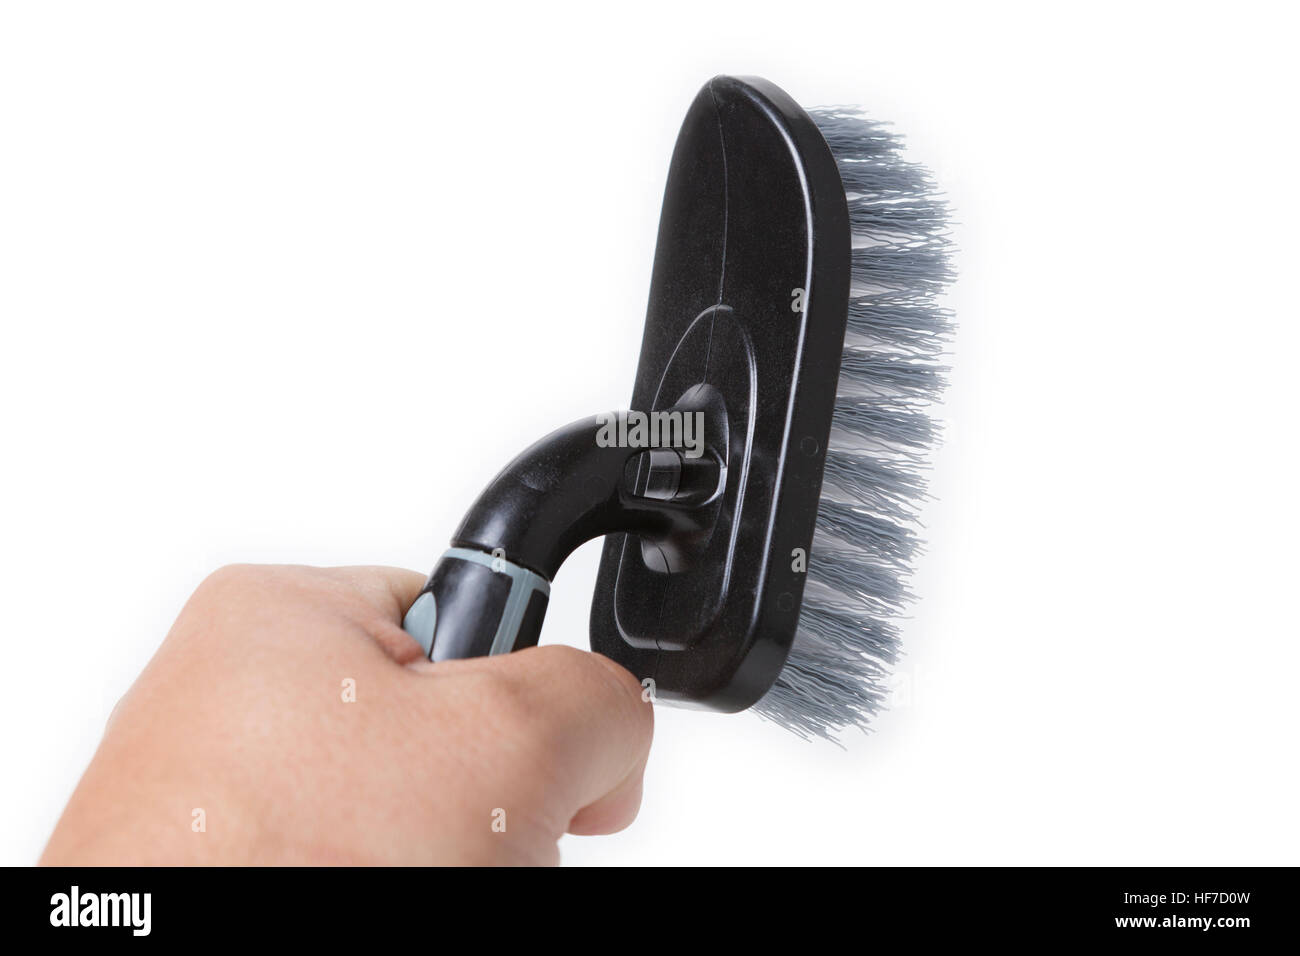 Handheld scrub brush for cleaning, isolated over white background. Stock Photo